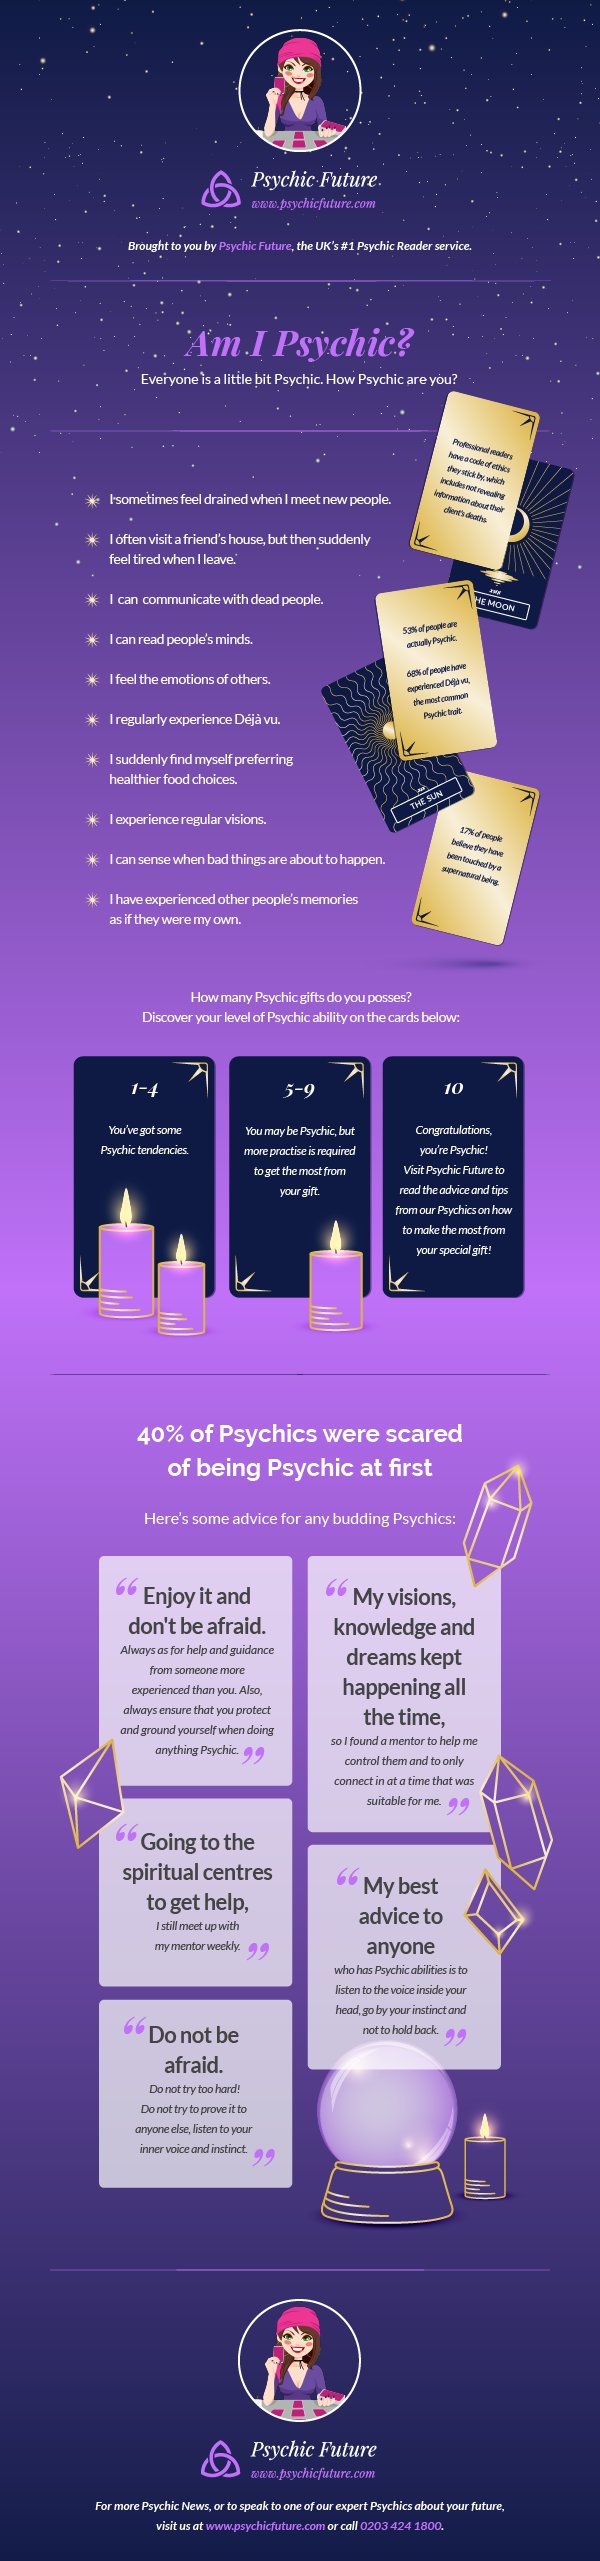 A detailed infographic about psychic abilities